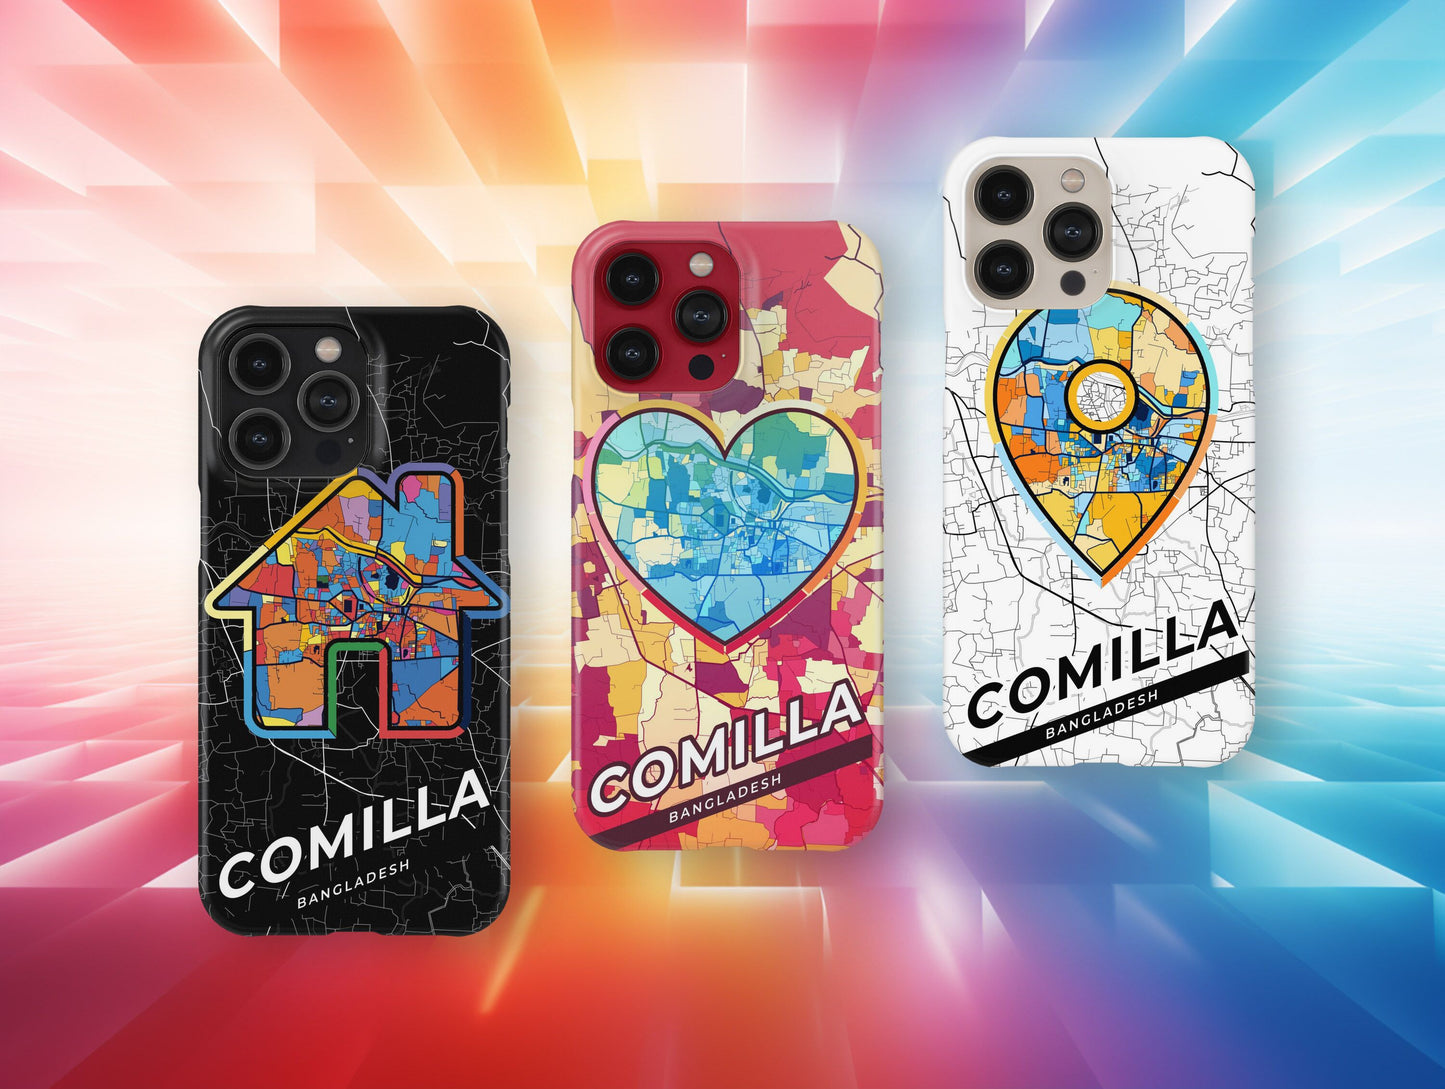 Comilla Bangladesh slim phone case with colorful icon. Birthday, wedding or housewarming gift. Couple match cases.